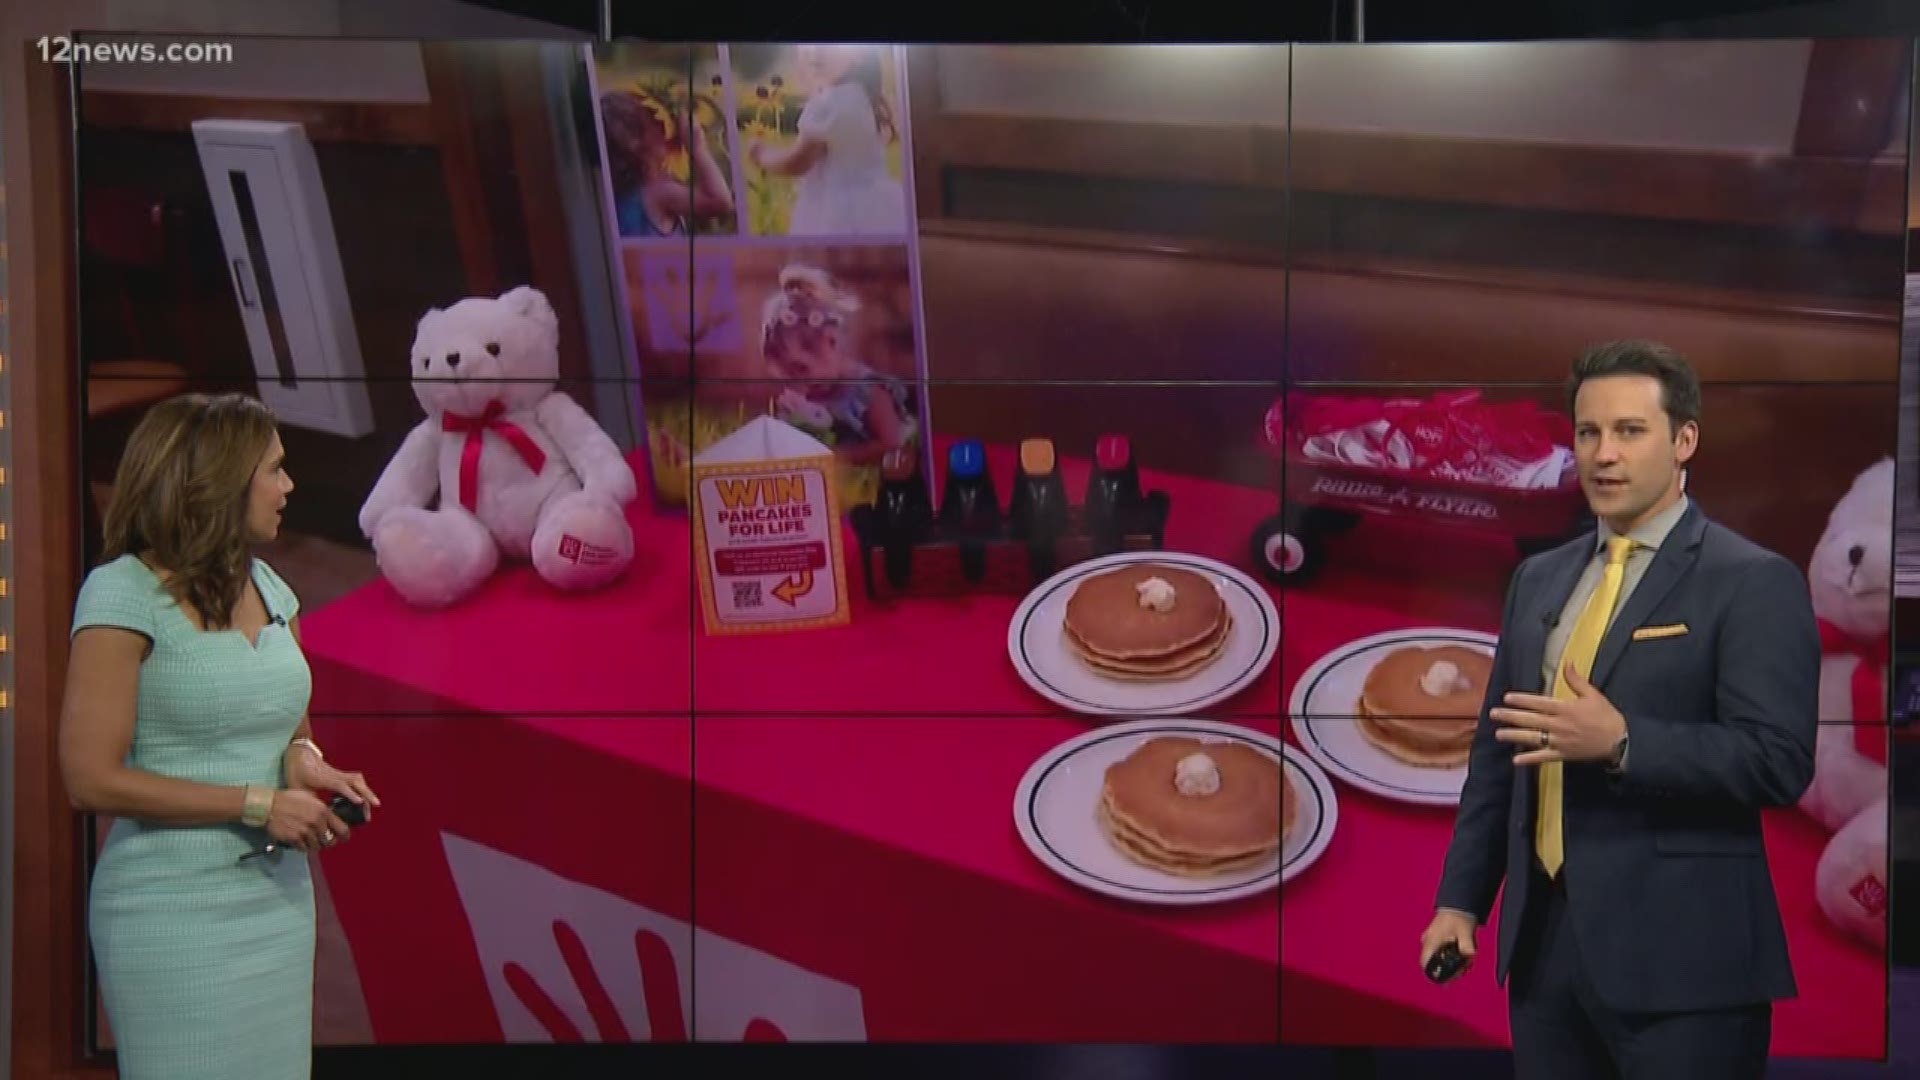 The deal is being given away by IHOP for National Pancake Day.